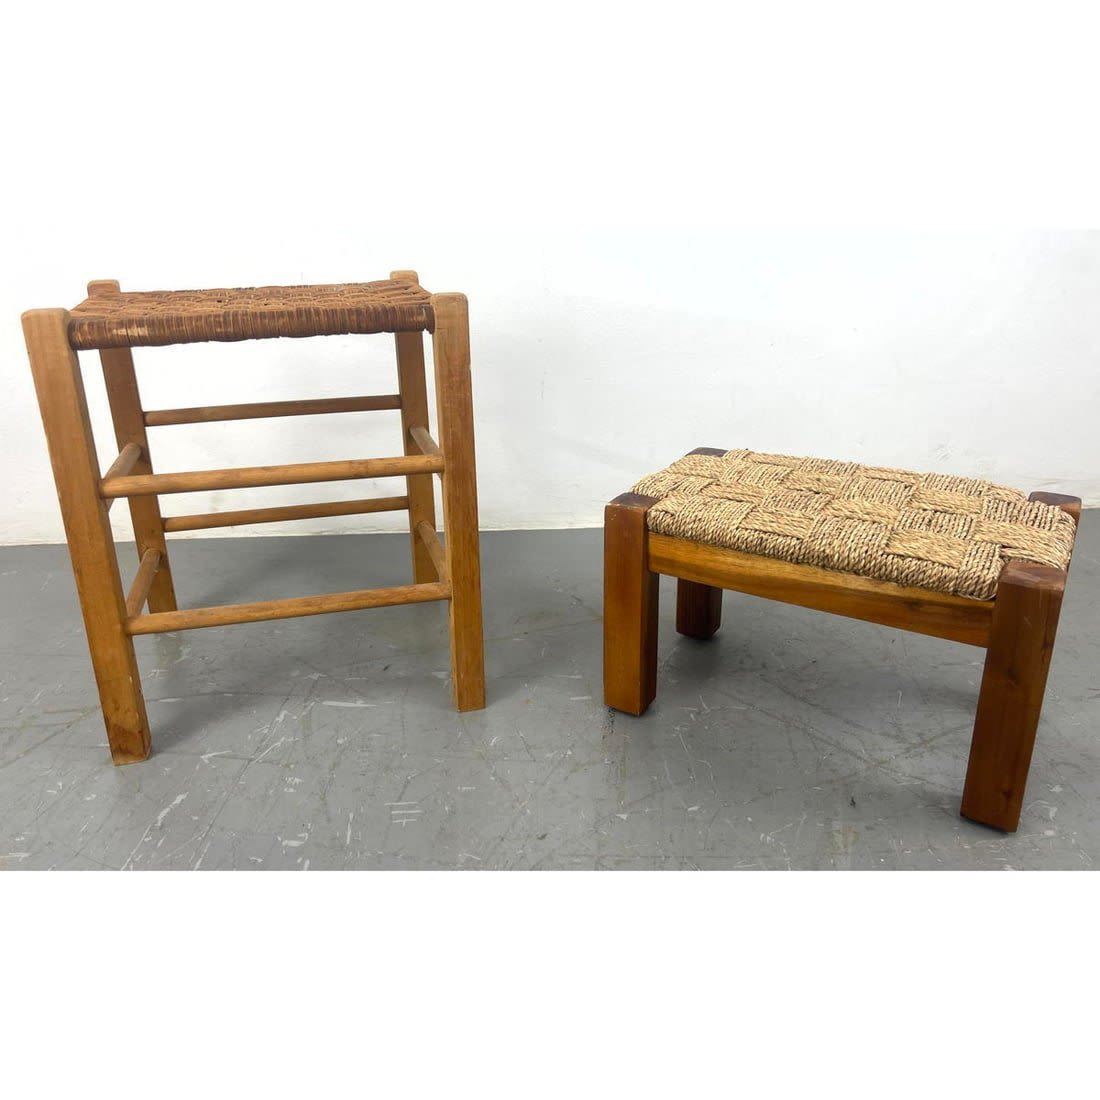 2pc Rustic Woven Seat Wood Frame